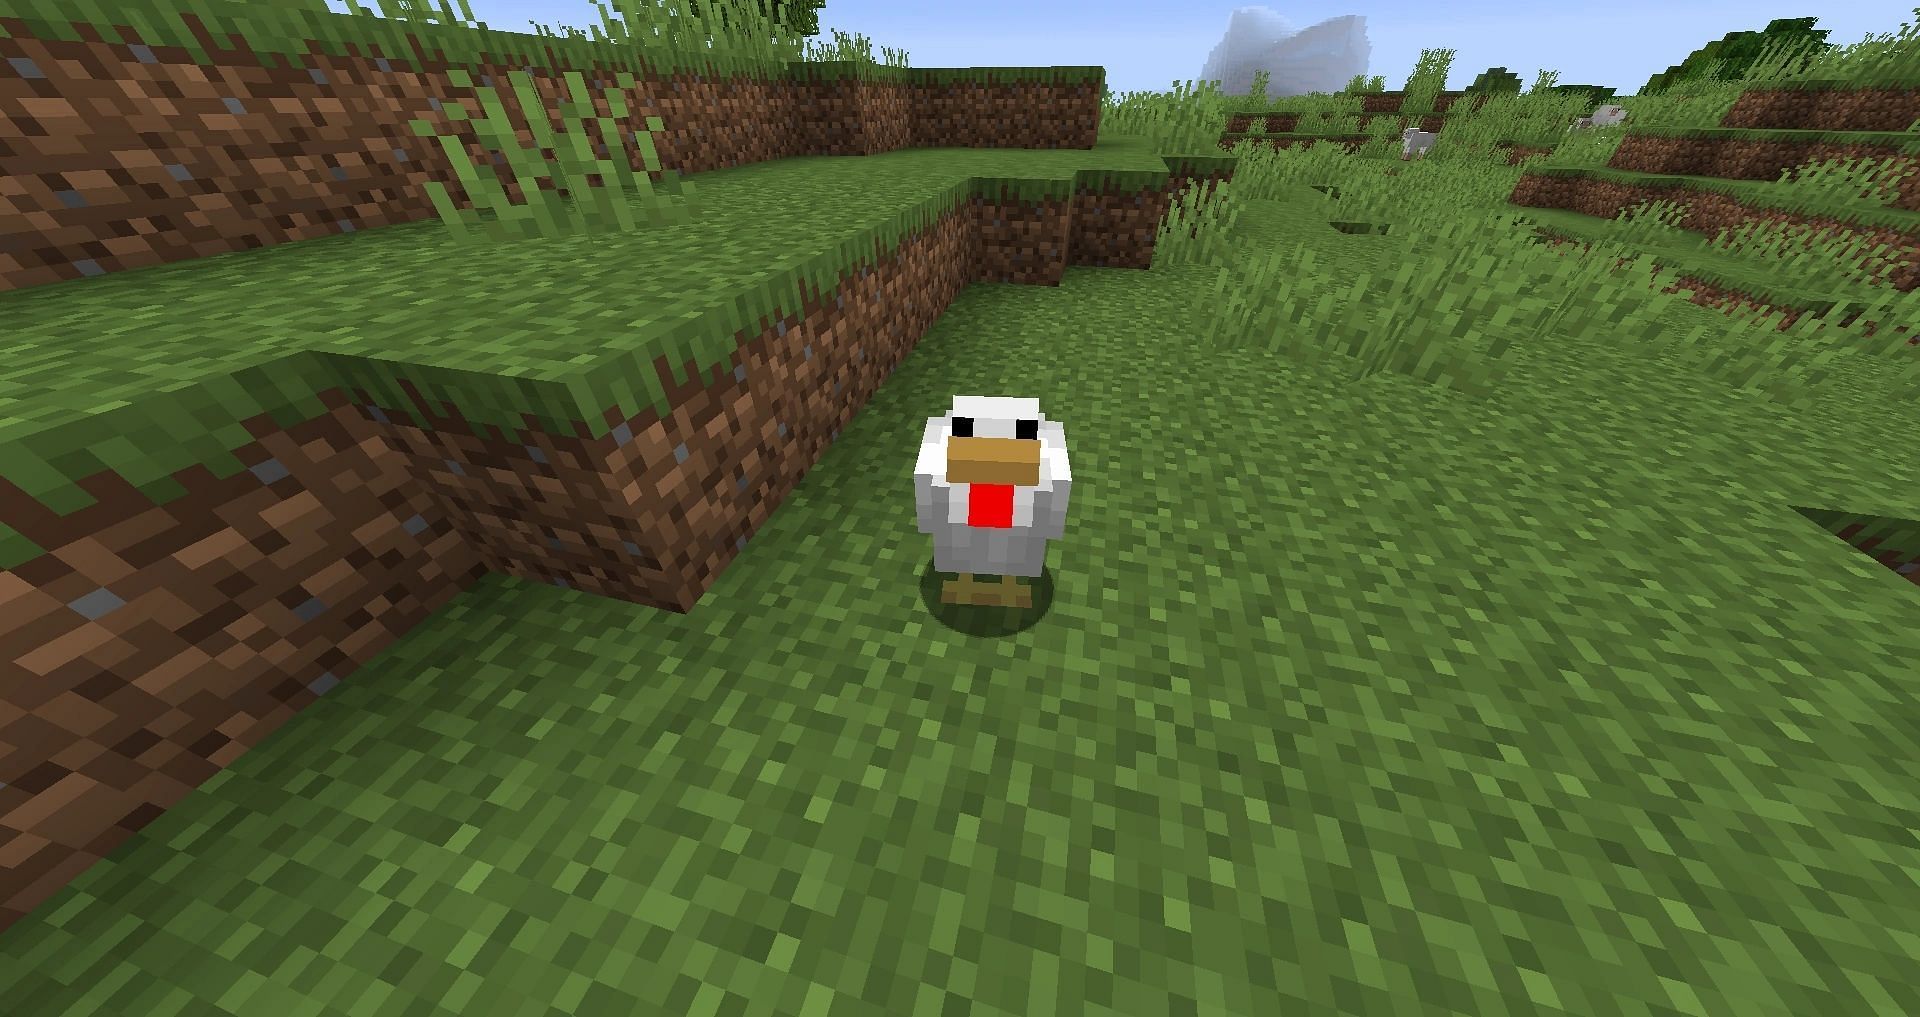 Chickens directly consume seeds to breed in Minecraft (Image via Mojang)